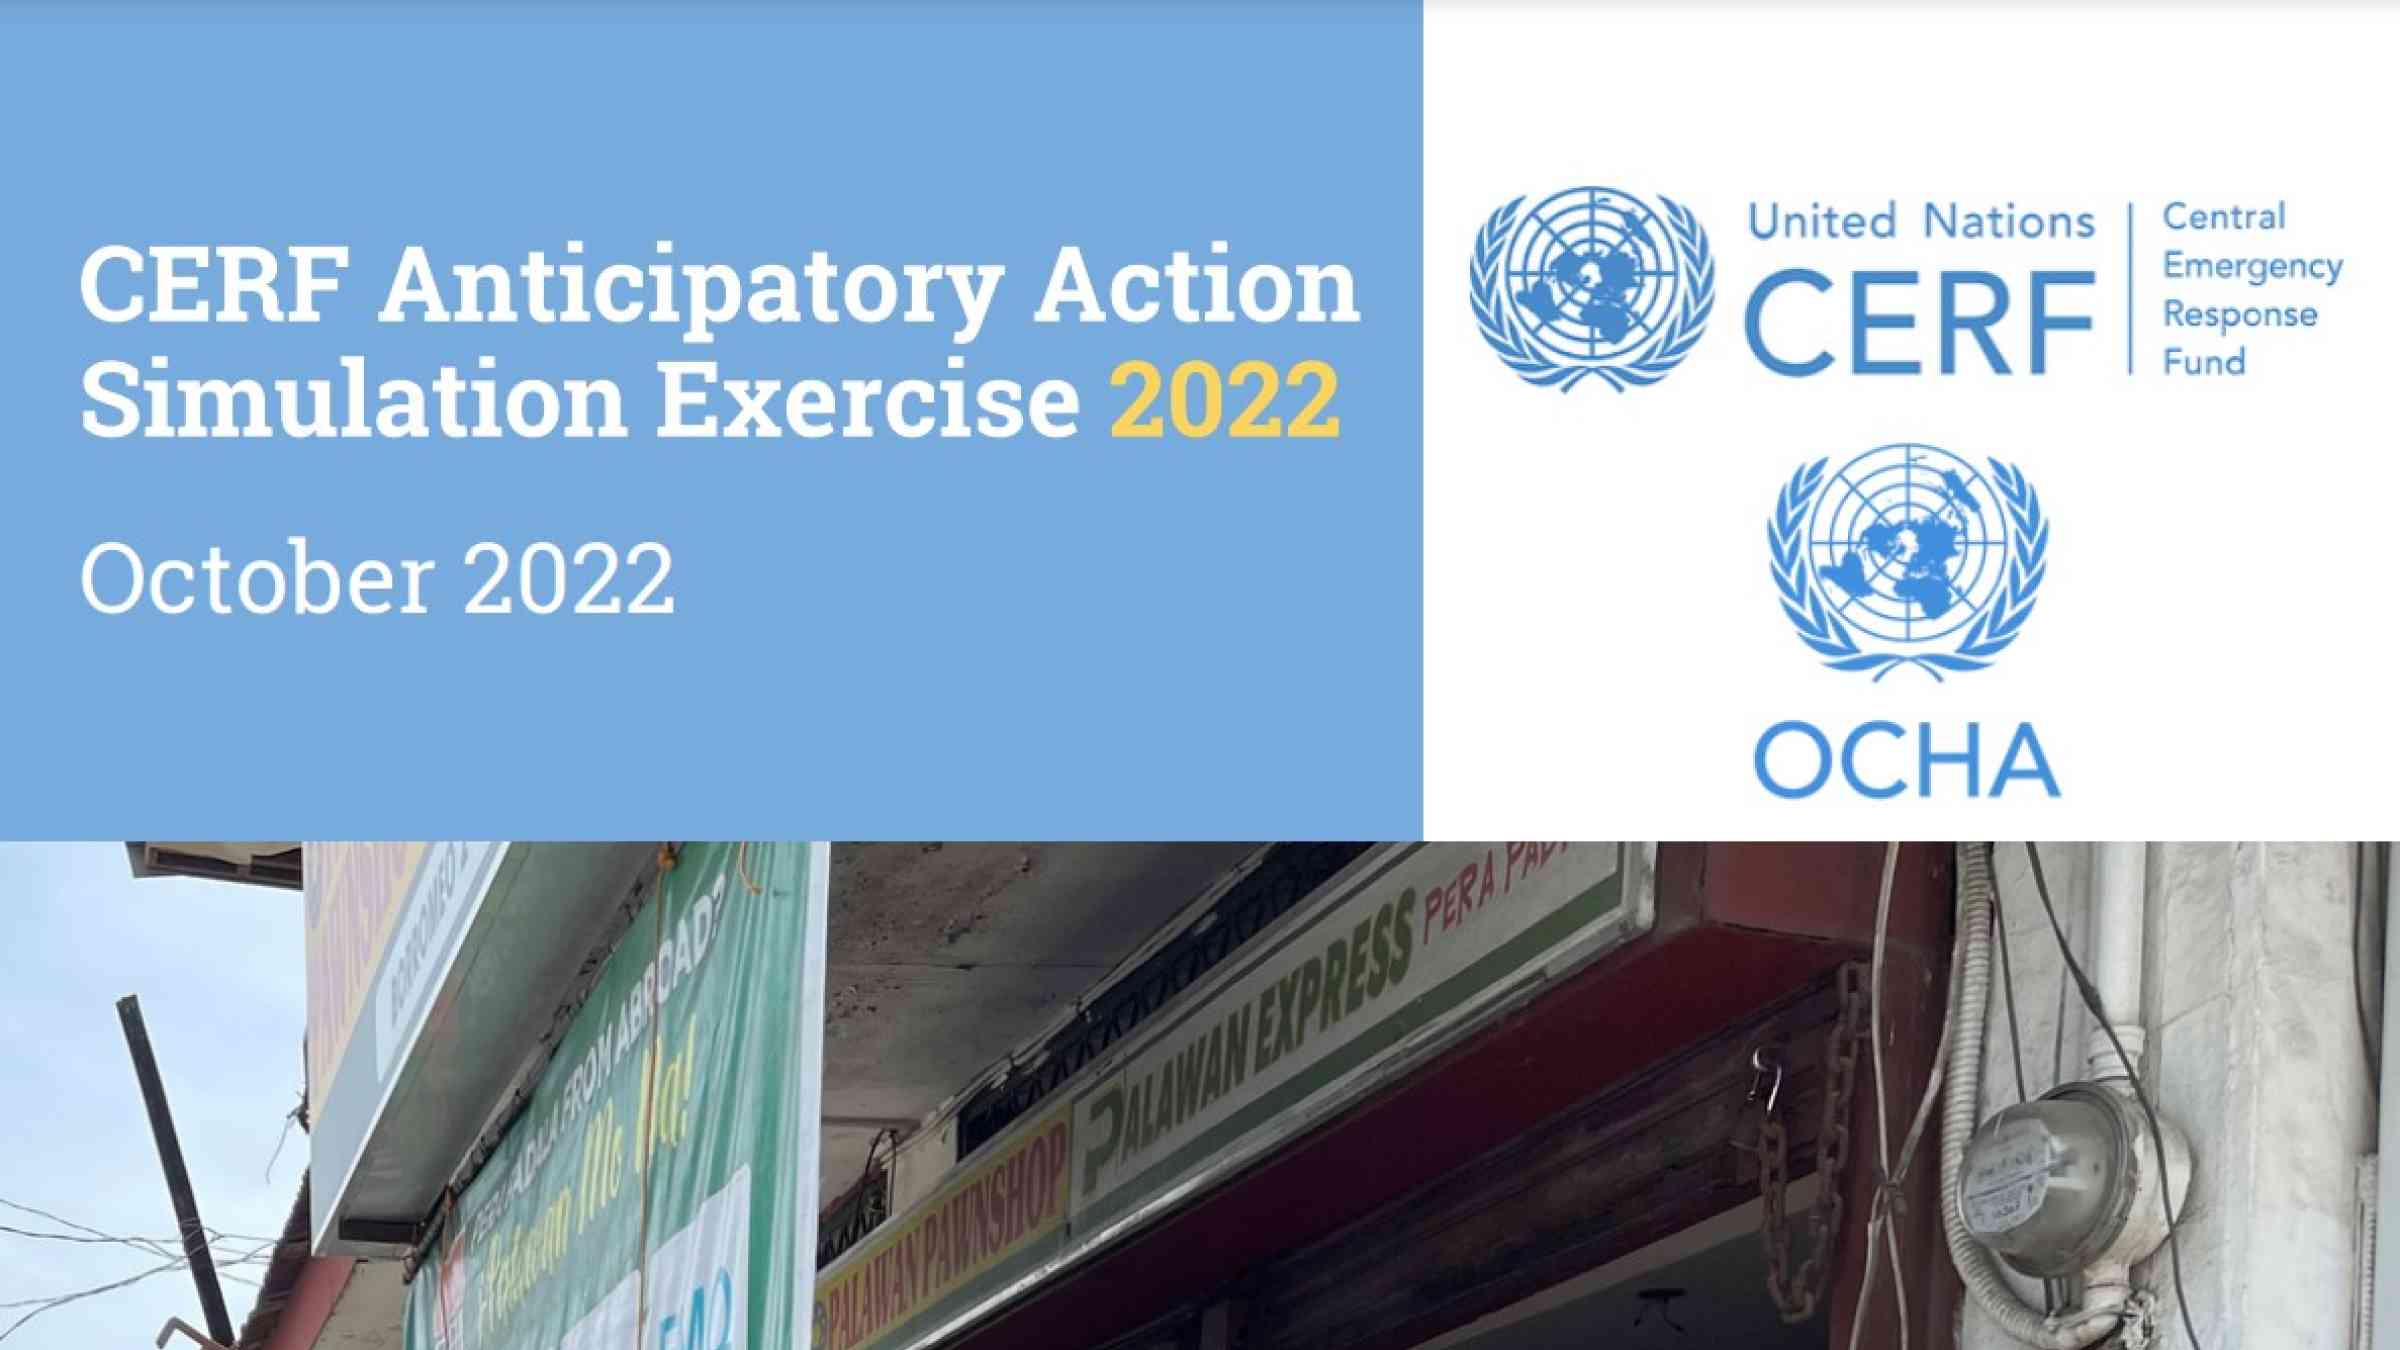 CERF anticipatory action simulation exercise 2022 (October 2022)